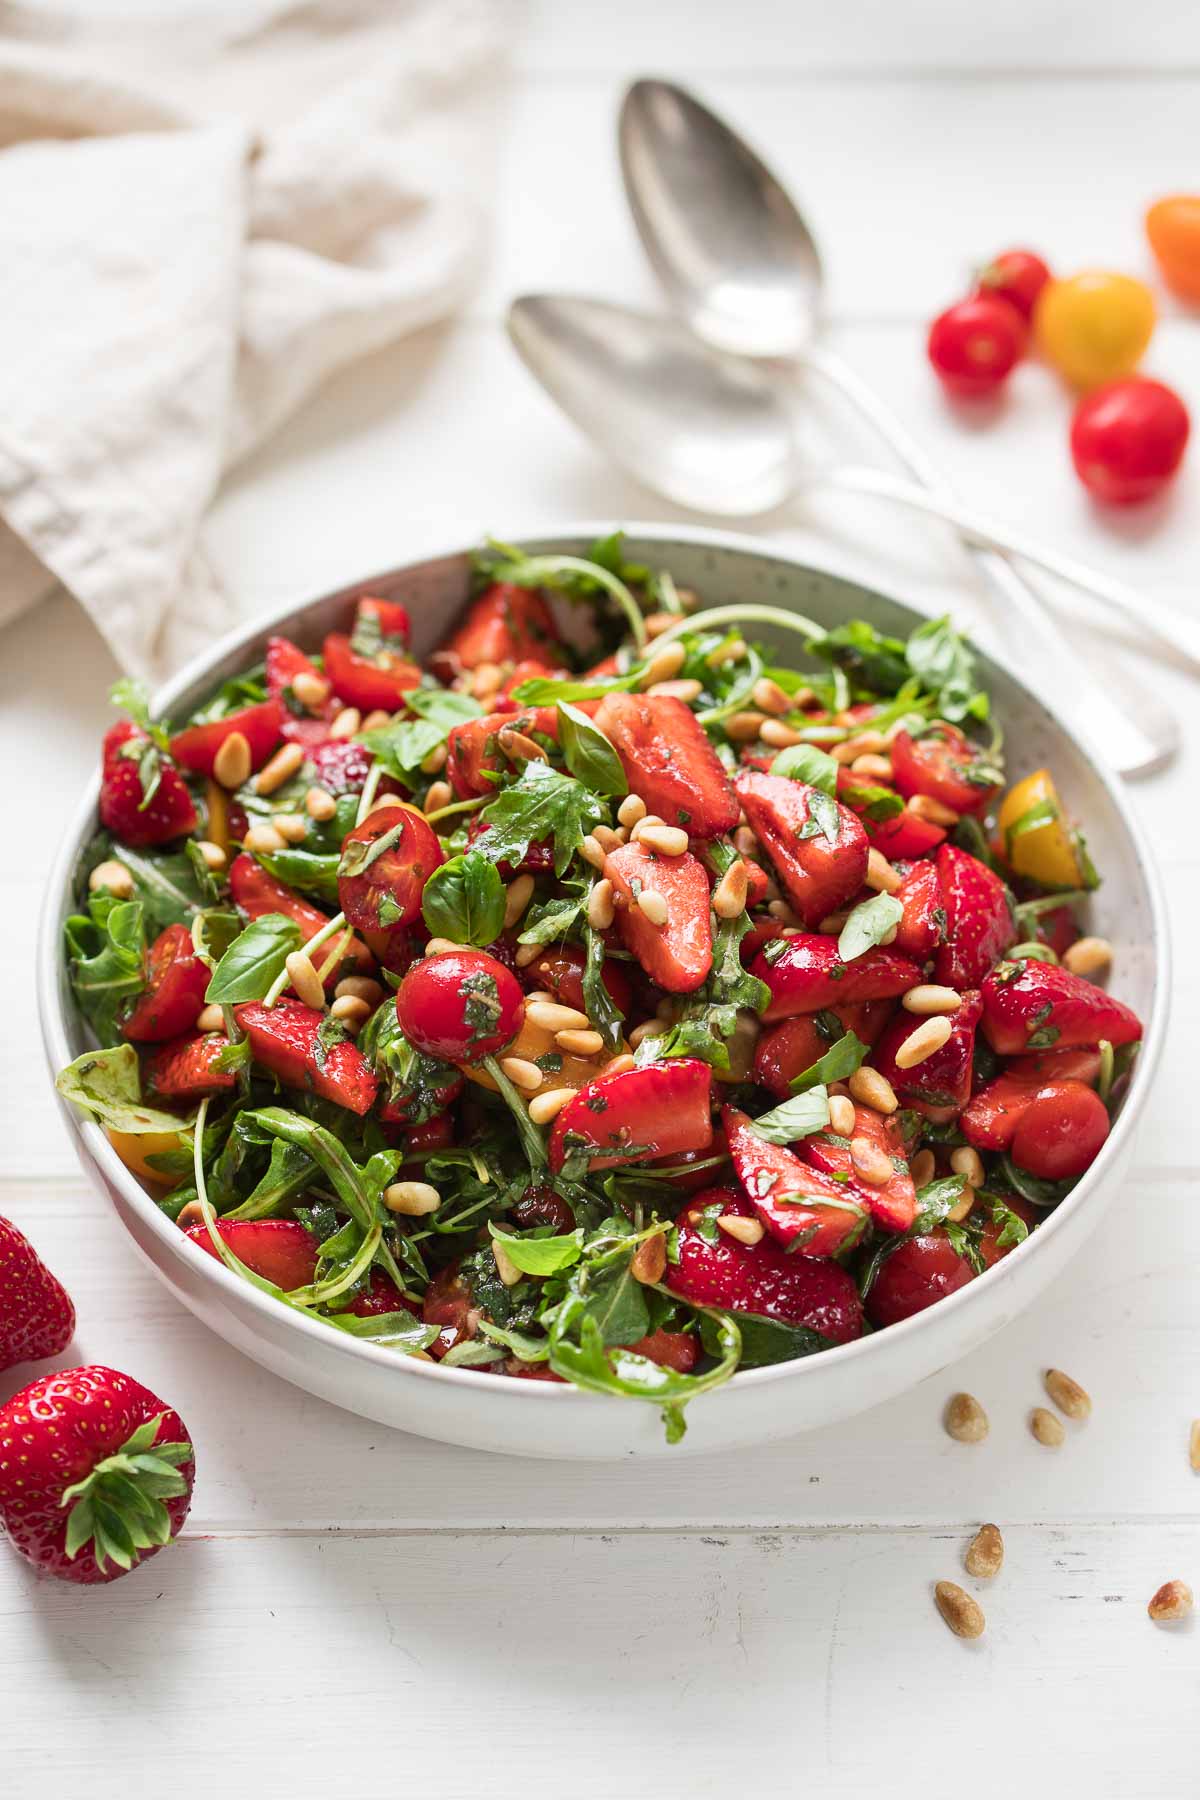 Summer Salad with Strawberries, Tomatoes, Mint & Basil